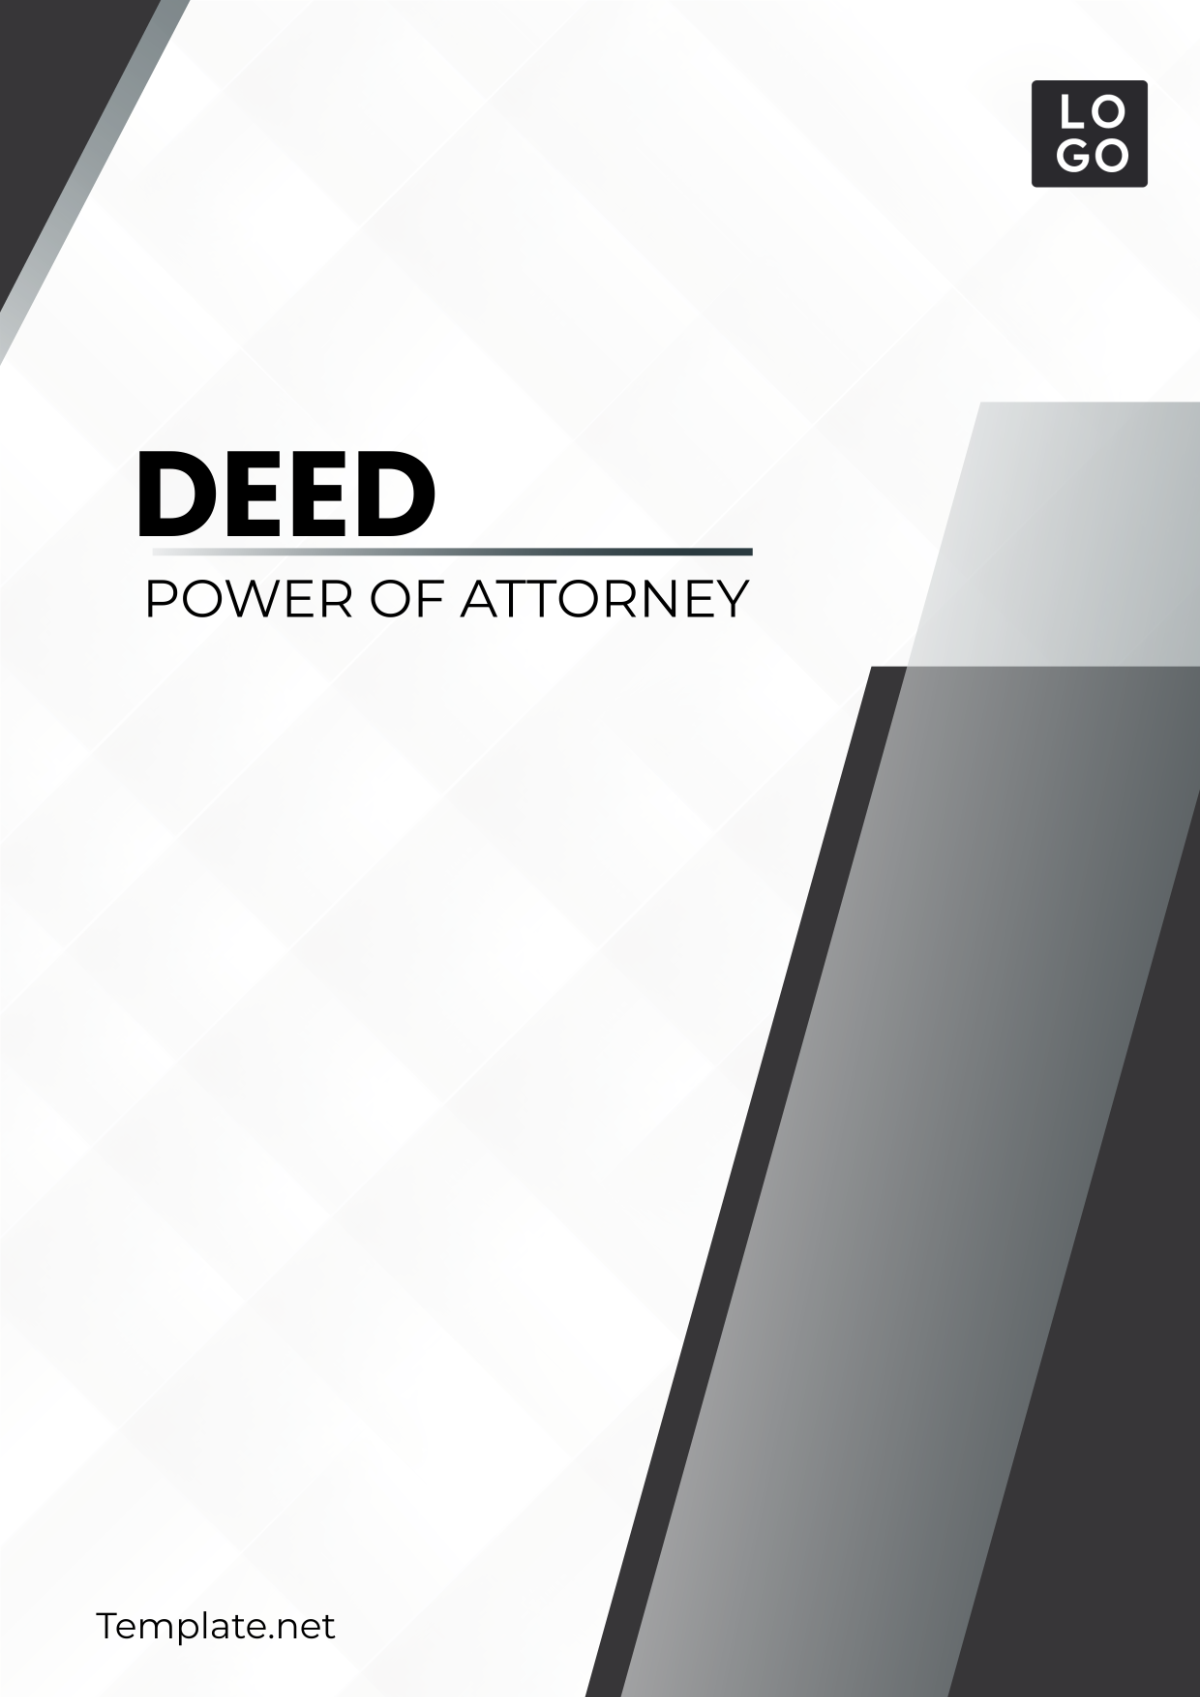 Deed Power of Attorney Template